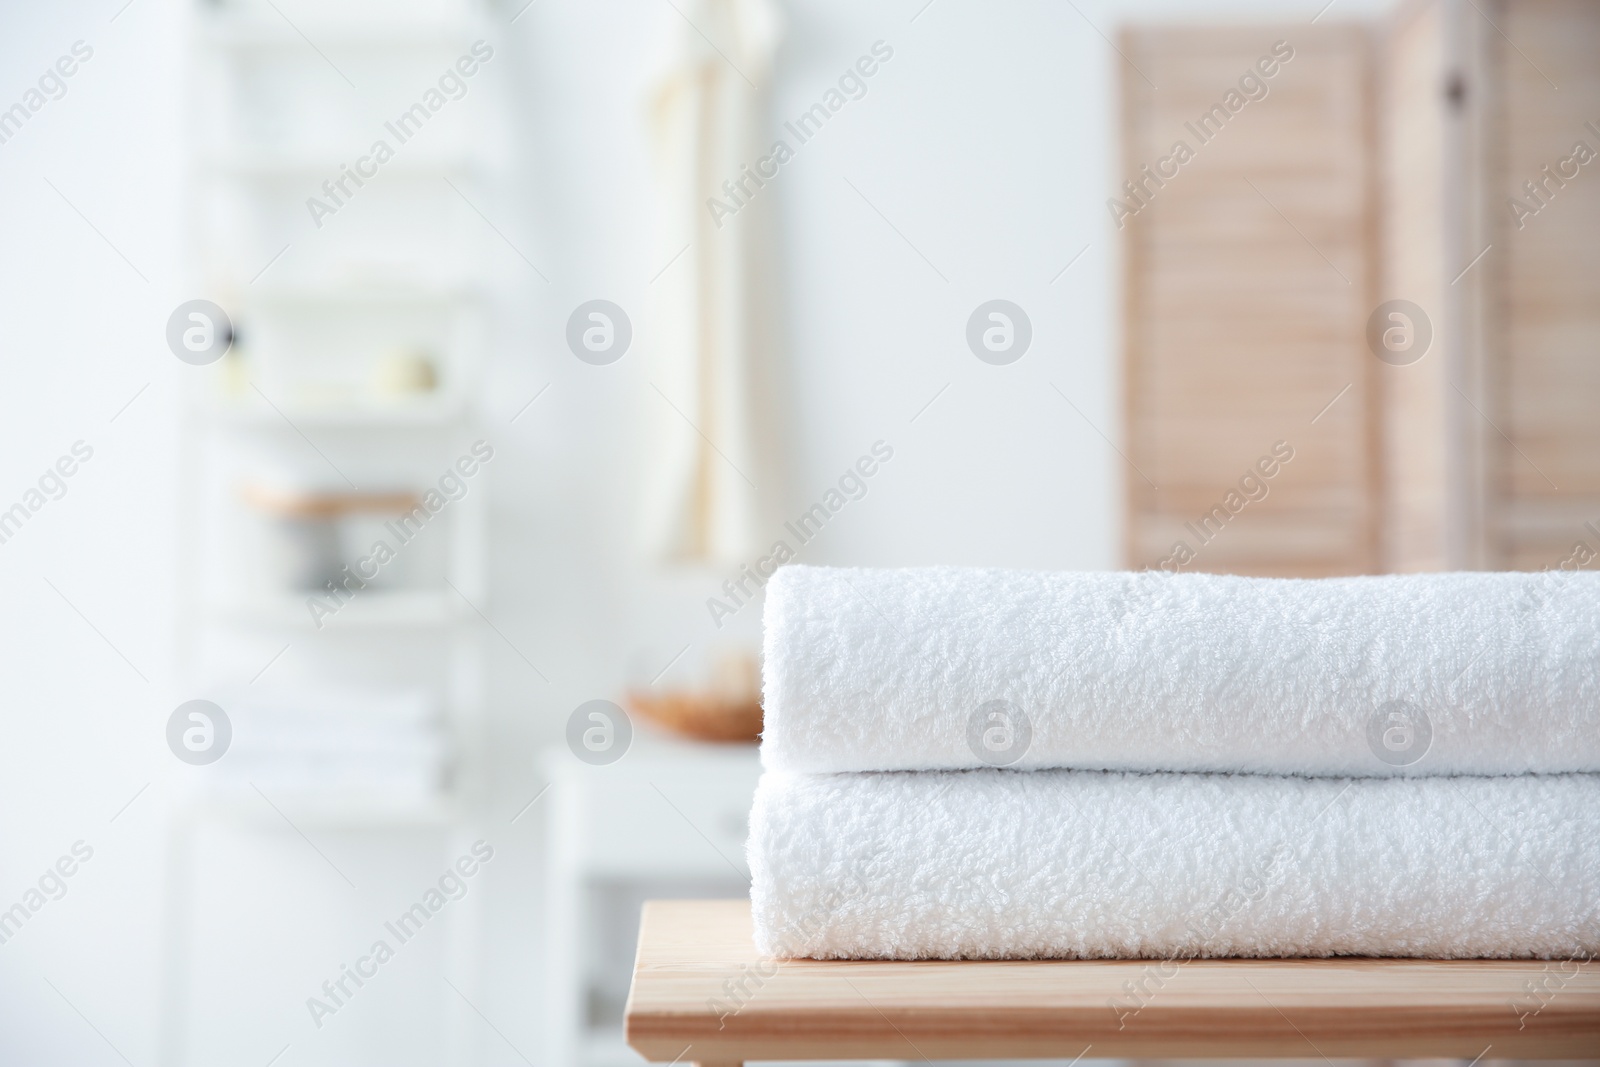 Photo of Stack of towels on table against blurred background